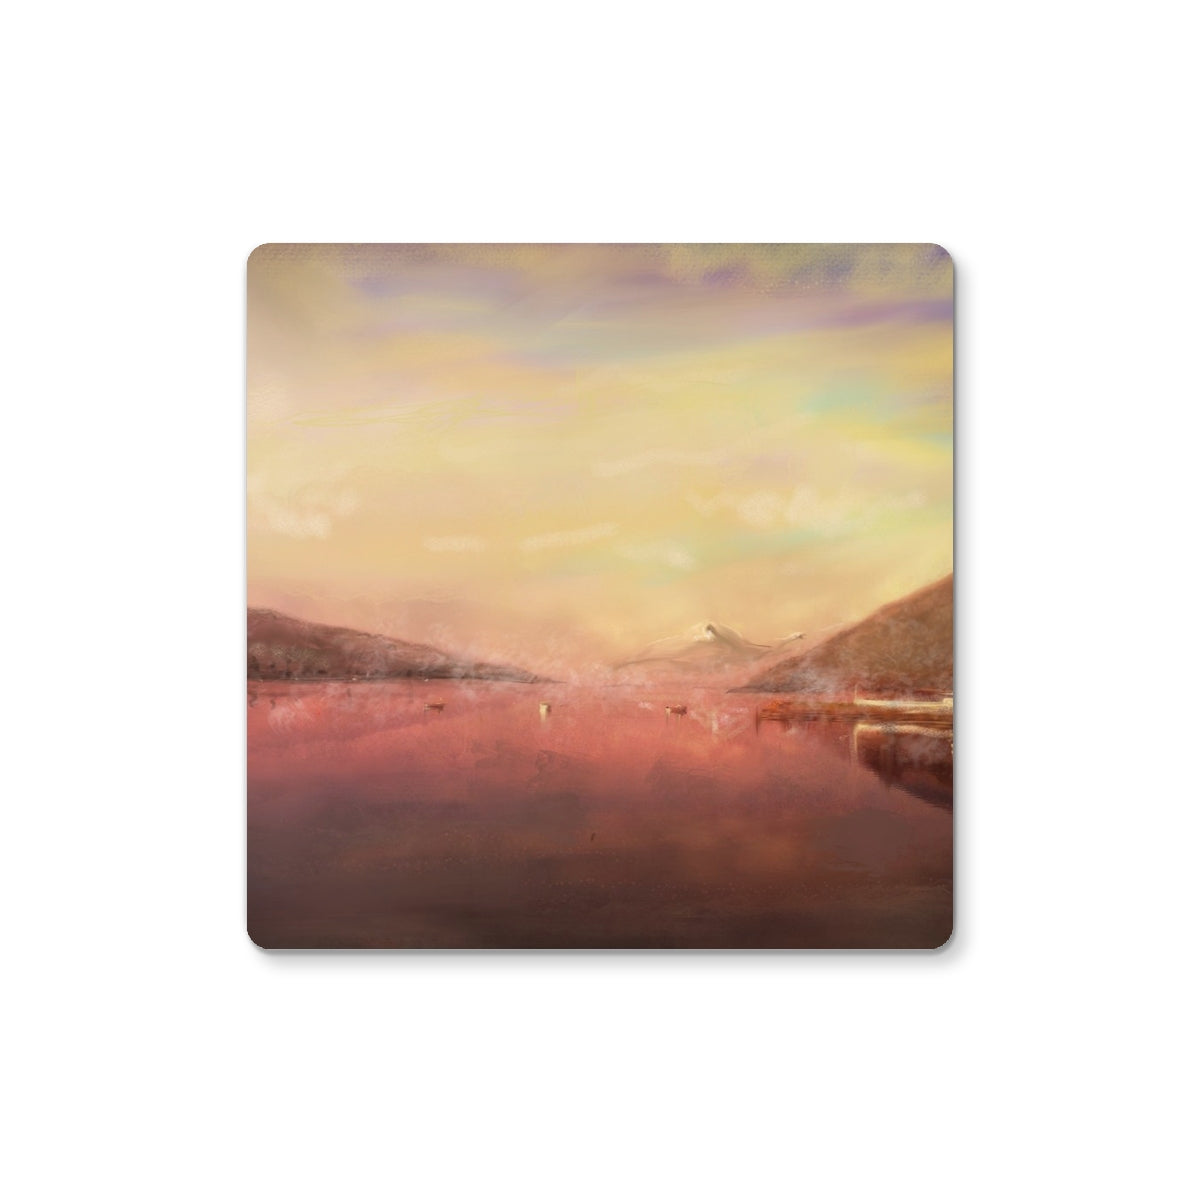 Loch Tay Art Gifts Coaster-Coasters-Scottish Lochs & Mountains Art Gallery-2 Coasters-Paintings, Prints, Homeware, Art Gifts From Scotland By Scottish Artist Kevin Hunter